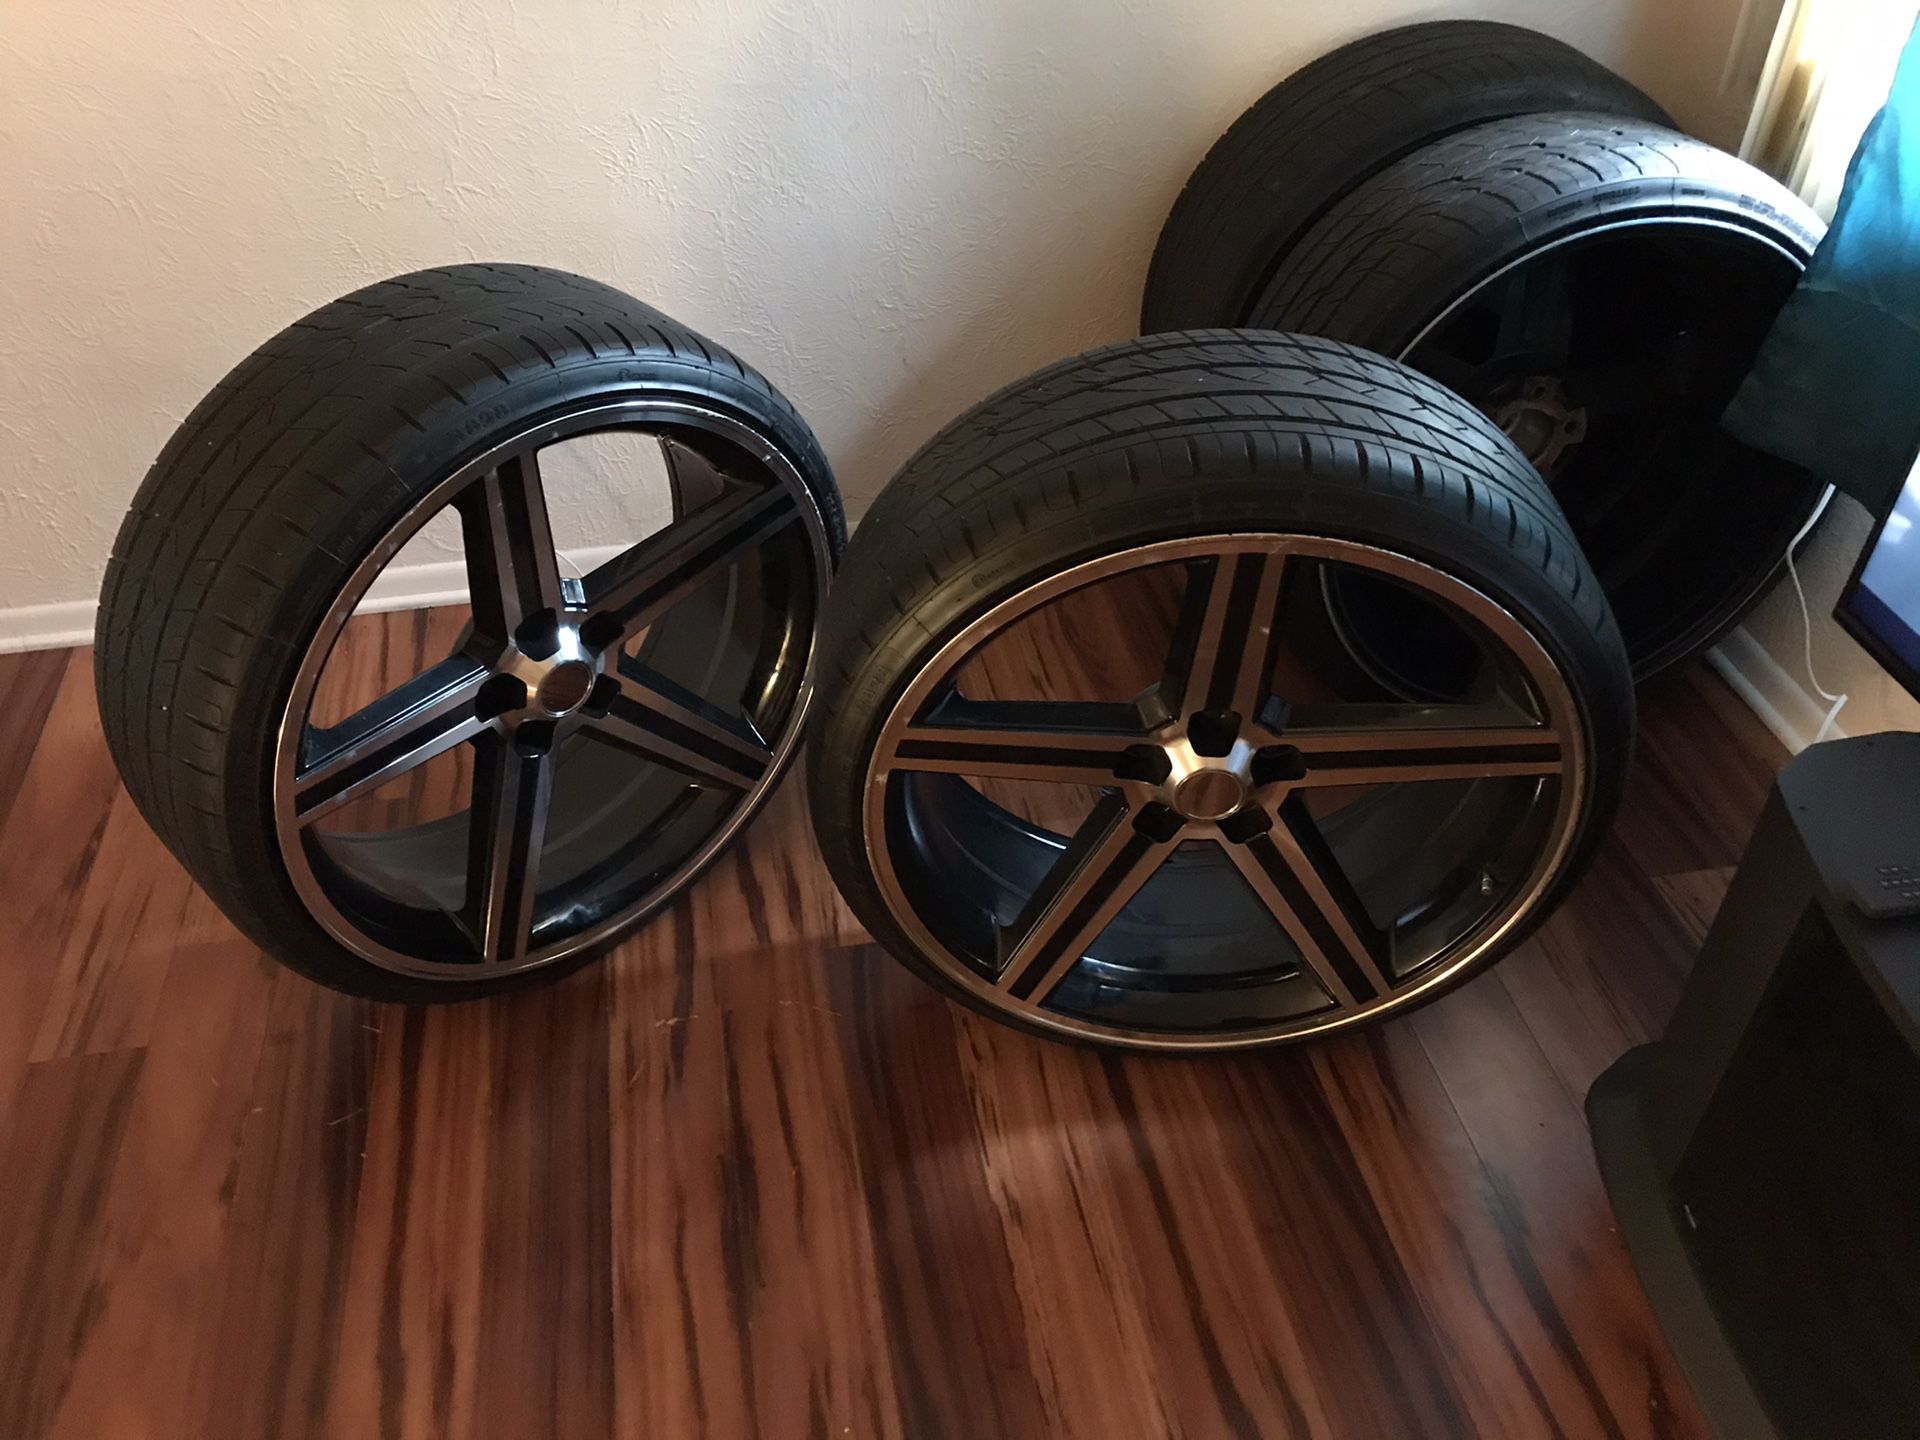 24” IROCS ....TIRES ARE 2 MONTHS OLD.RIMS ARE IN EXCELLENT CONDITION..$1200 OR BEST OFFER...NO LOW BALLERS